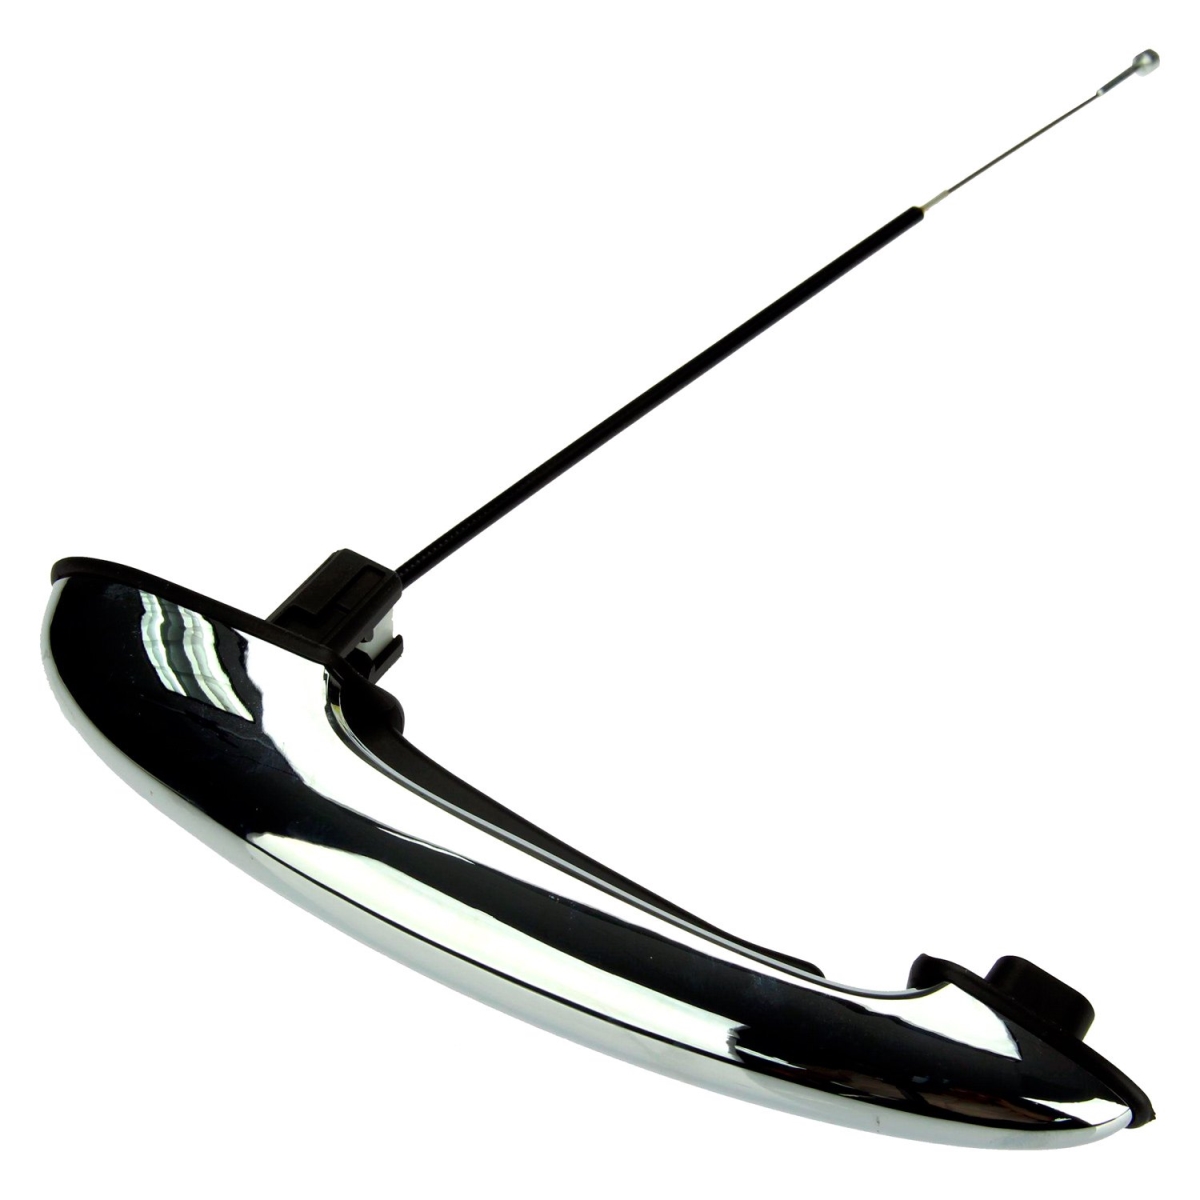 UPC 194316072469 product image for 51217198472 Right Door Handle for 2002-2015 Mini Cooper | upcitemdb.com